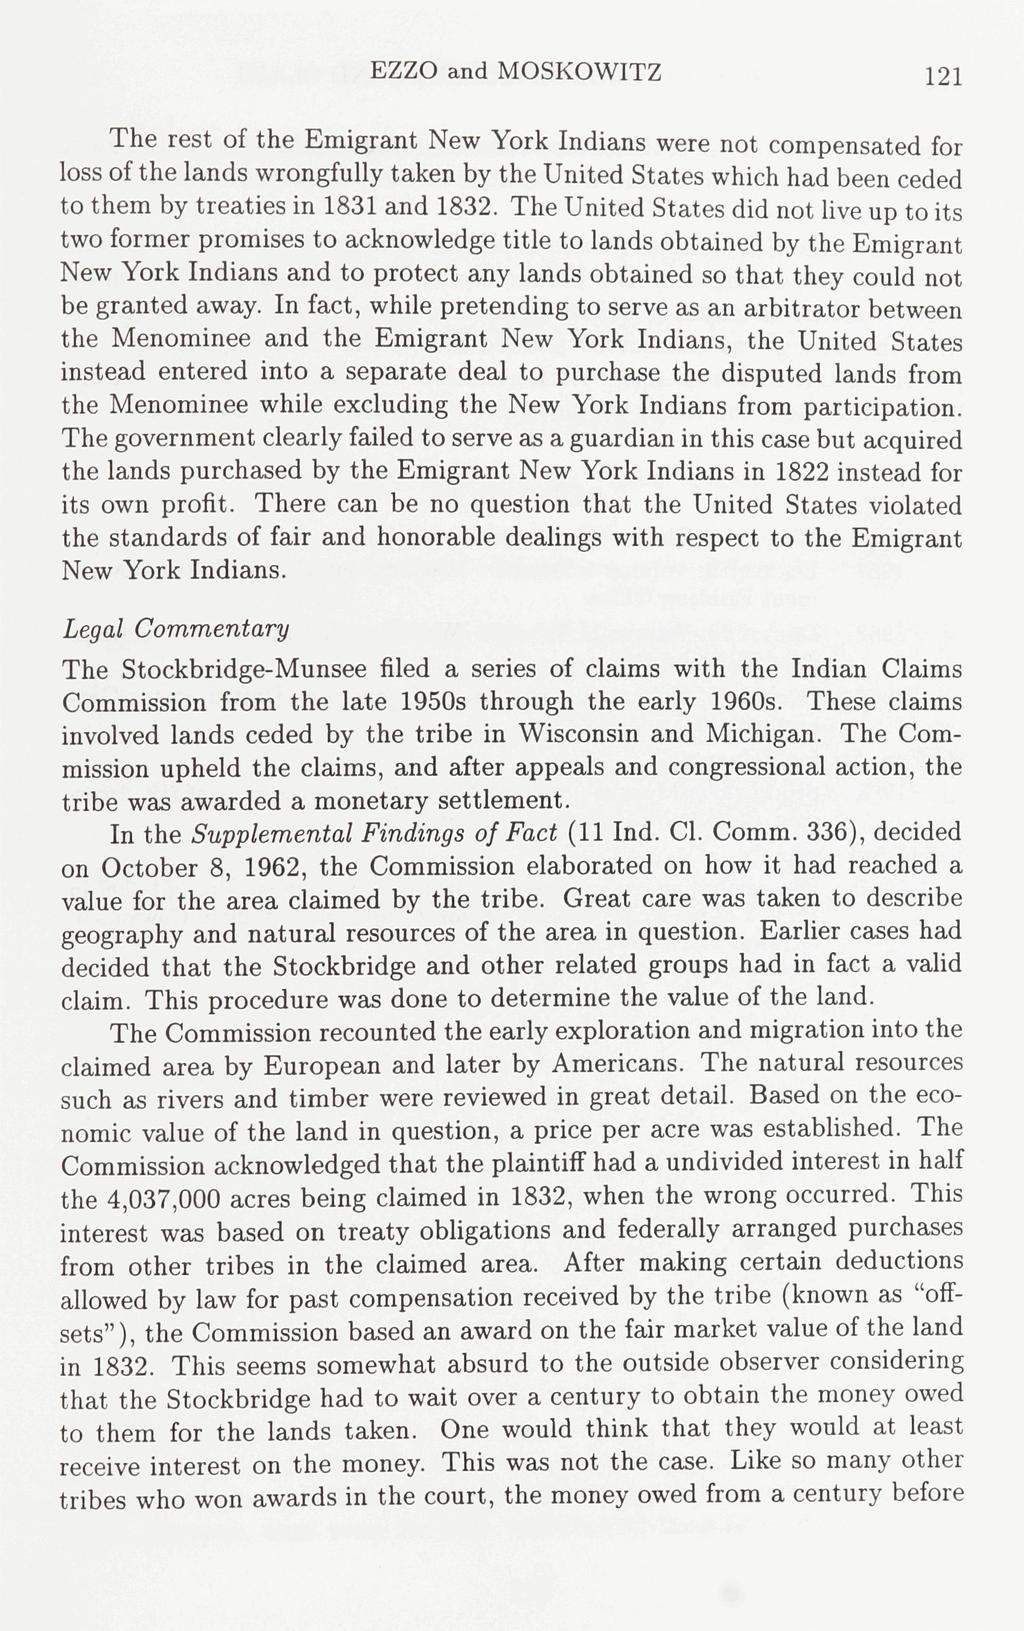 EZZO and MOSKOWITZ 121 The rest of the Emigrant New York Indians were not compensated for loss of the lands wrongfully taken by the United States which had been ceded to them by treaties in 1831 and